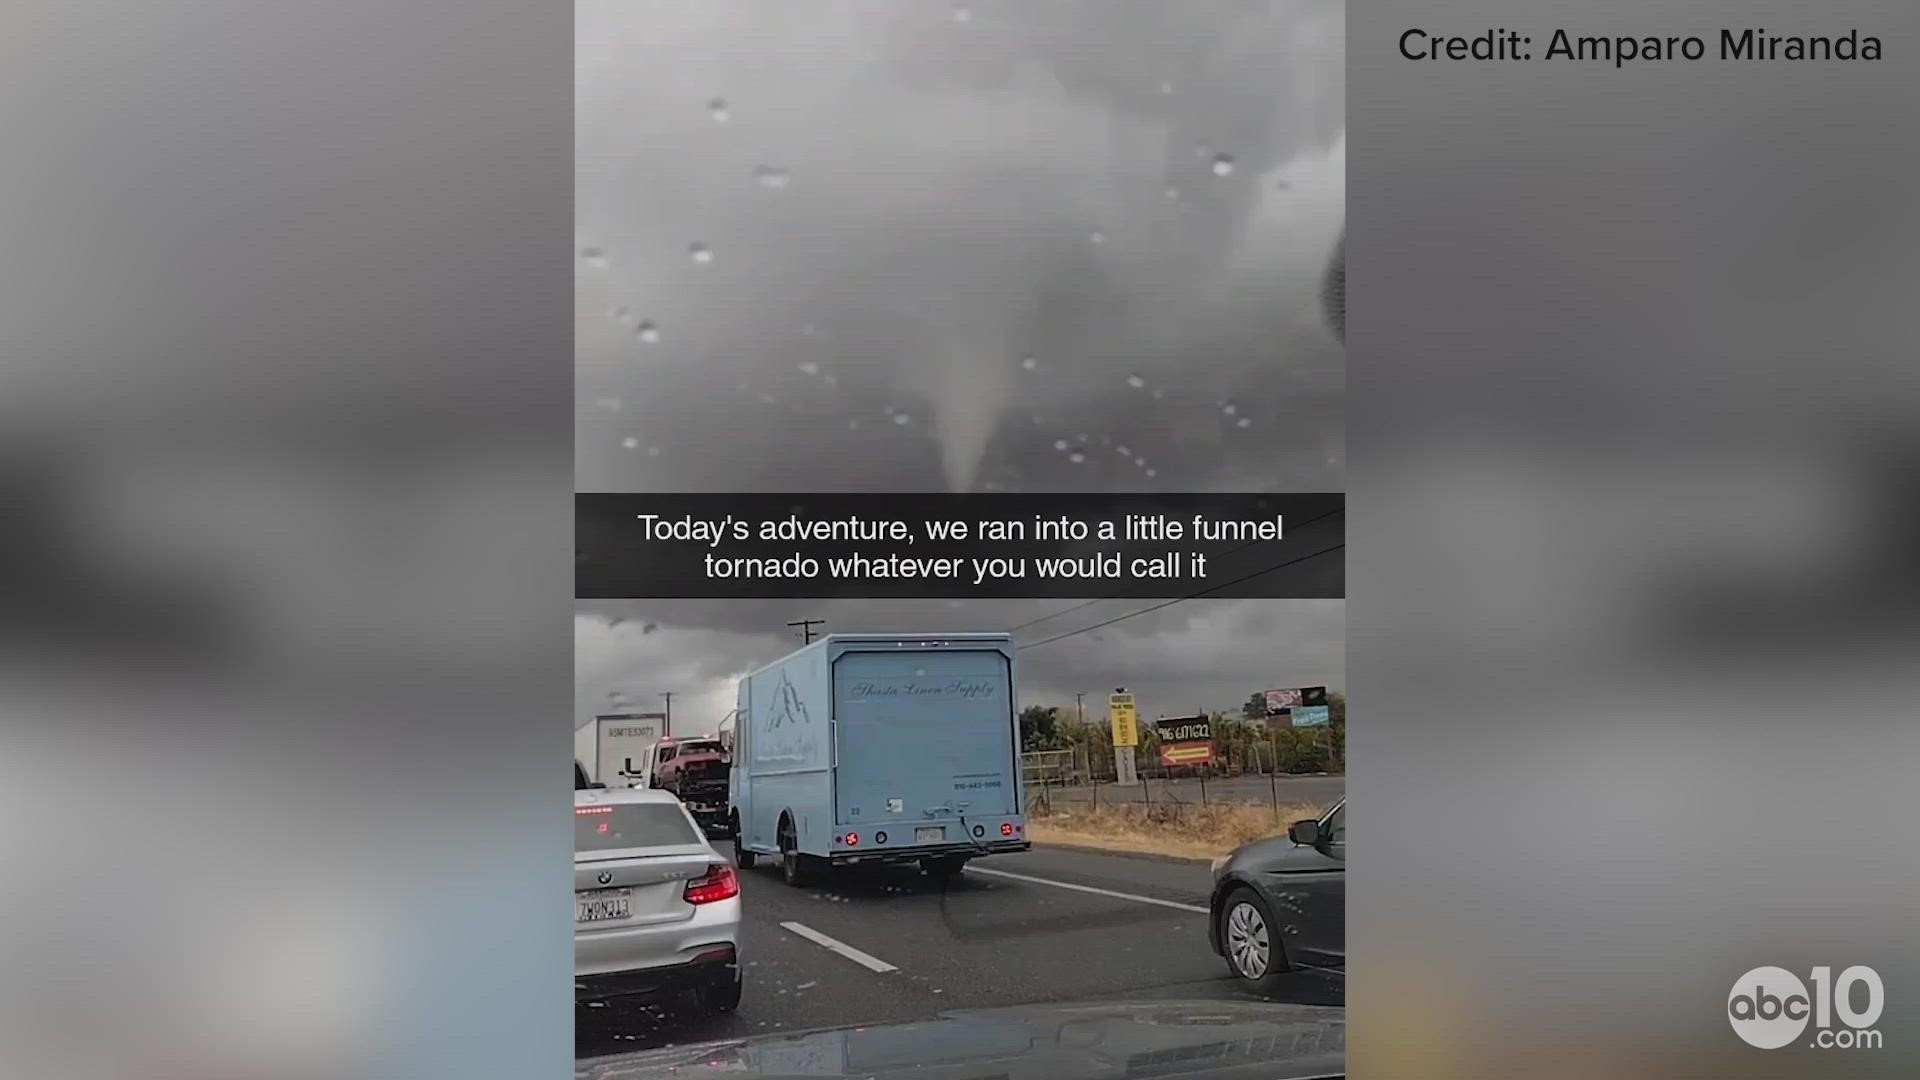 The National Weather Service in Sacramento says it received pictures of a funnel cloud, so they sent officials out to determine if the storm was caused by a tornado.